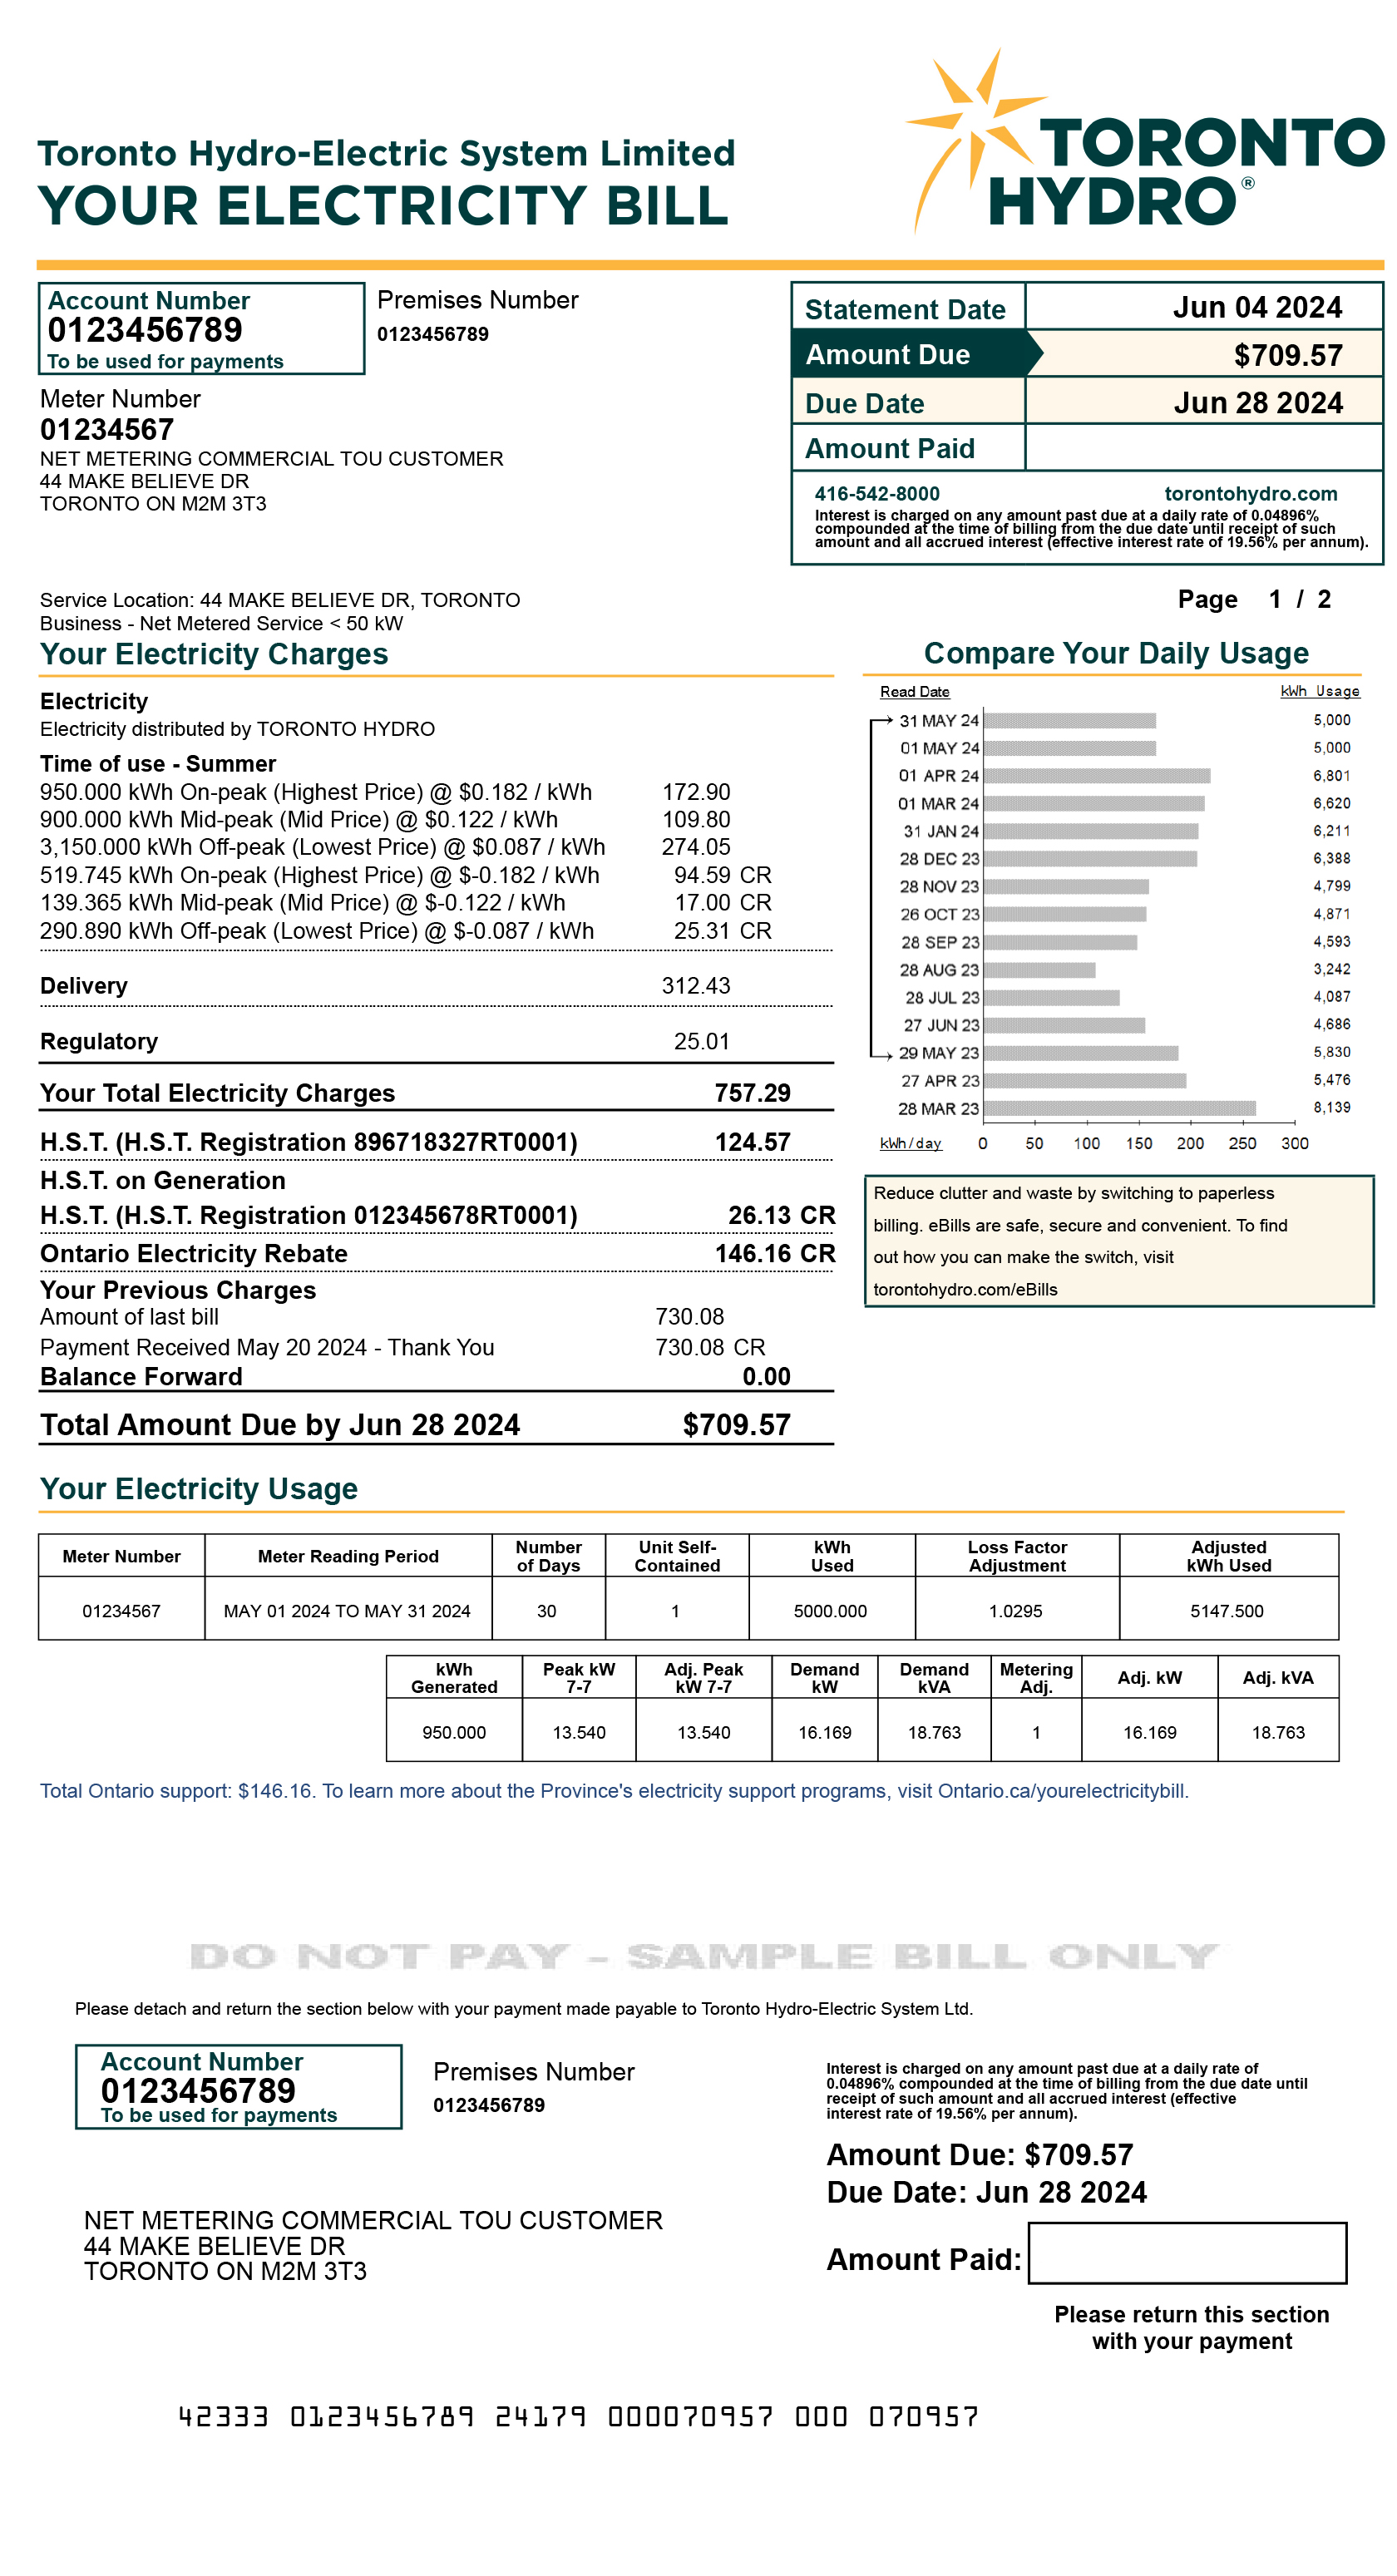 Small commercial net metering Time-of-Use sample bill.